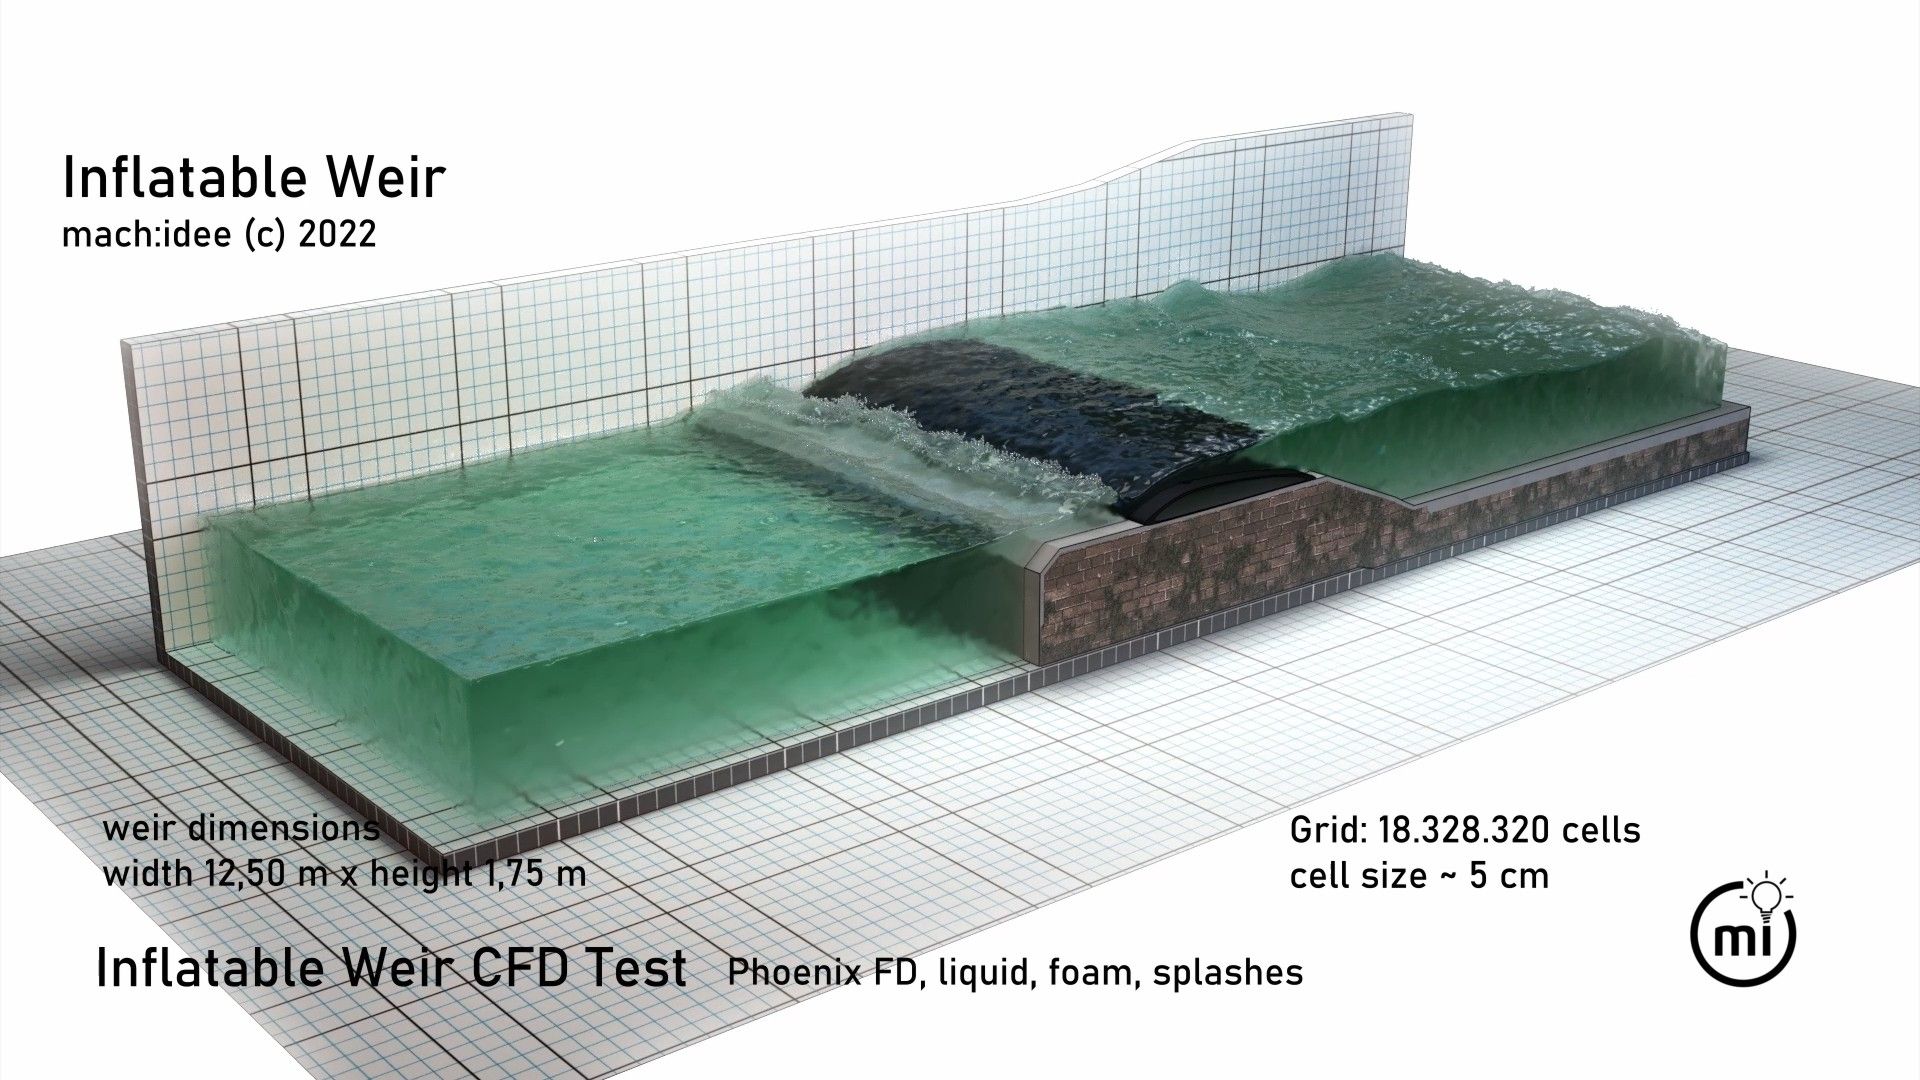 Inflatable Weir CFD Test